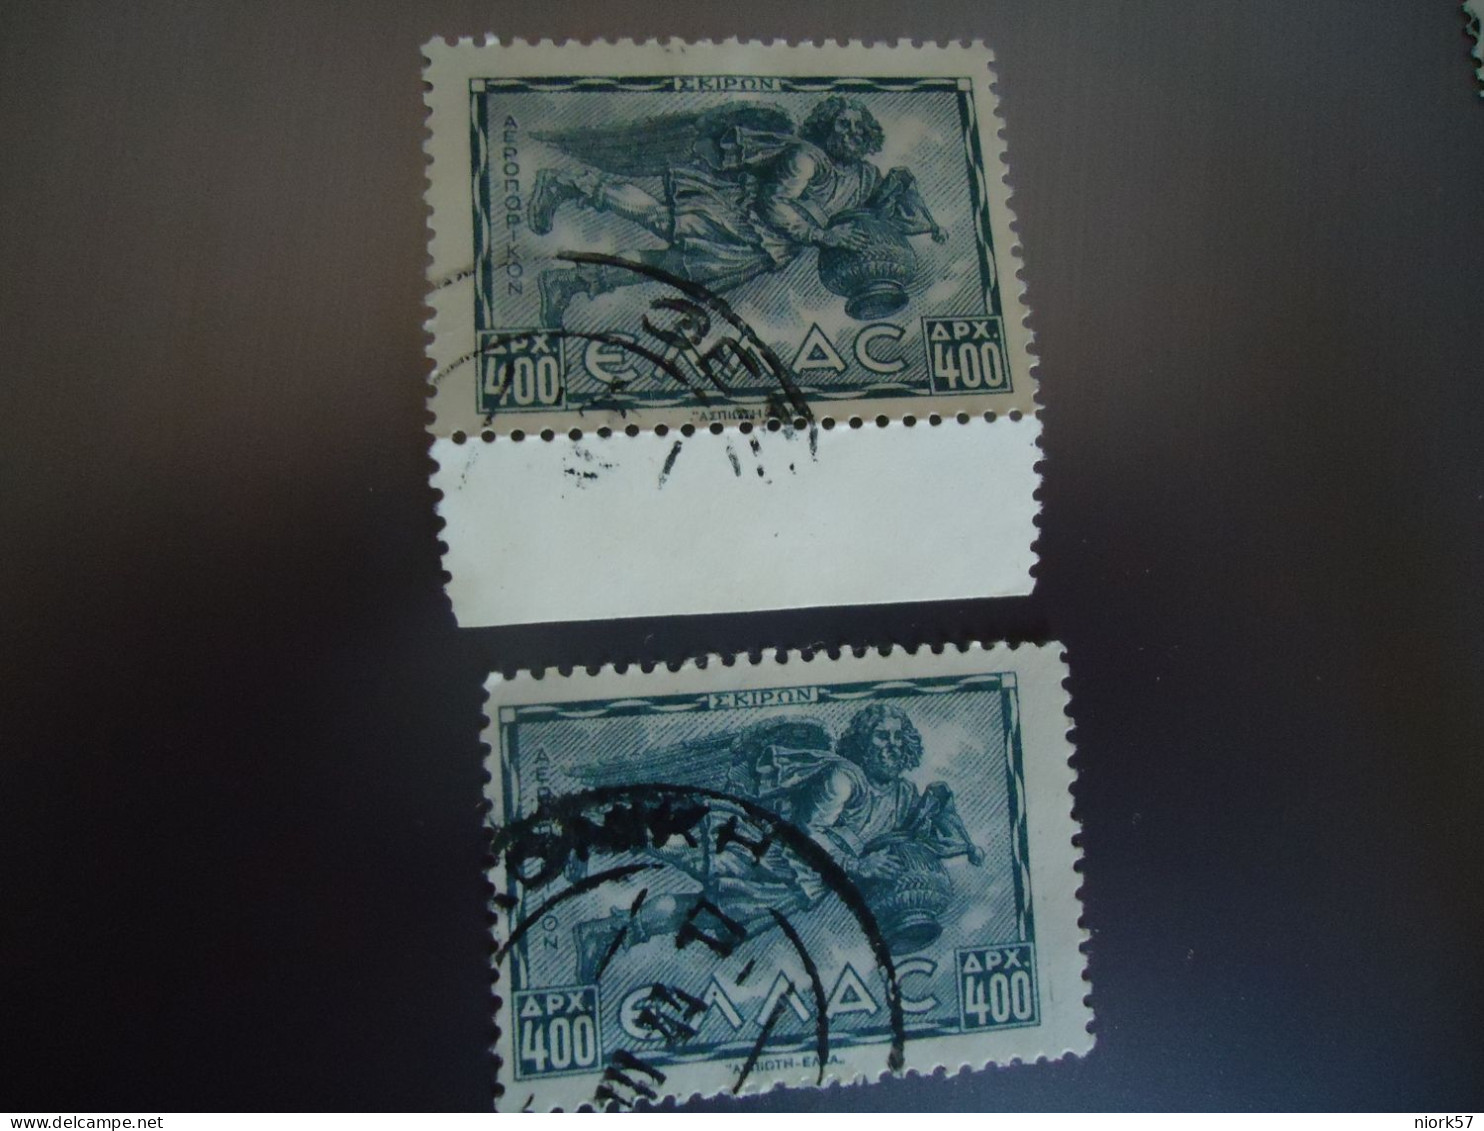 GREECE  USED  2  STAMPS  1943  AIR WINDS - Timbres De Distributeurs [ATM]